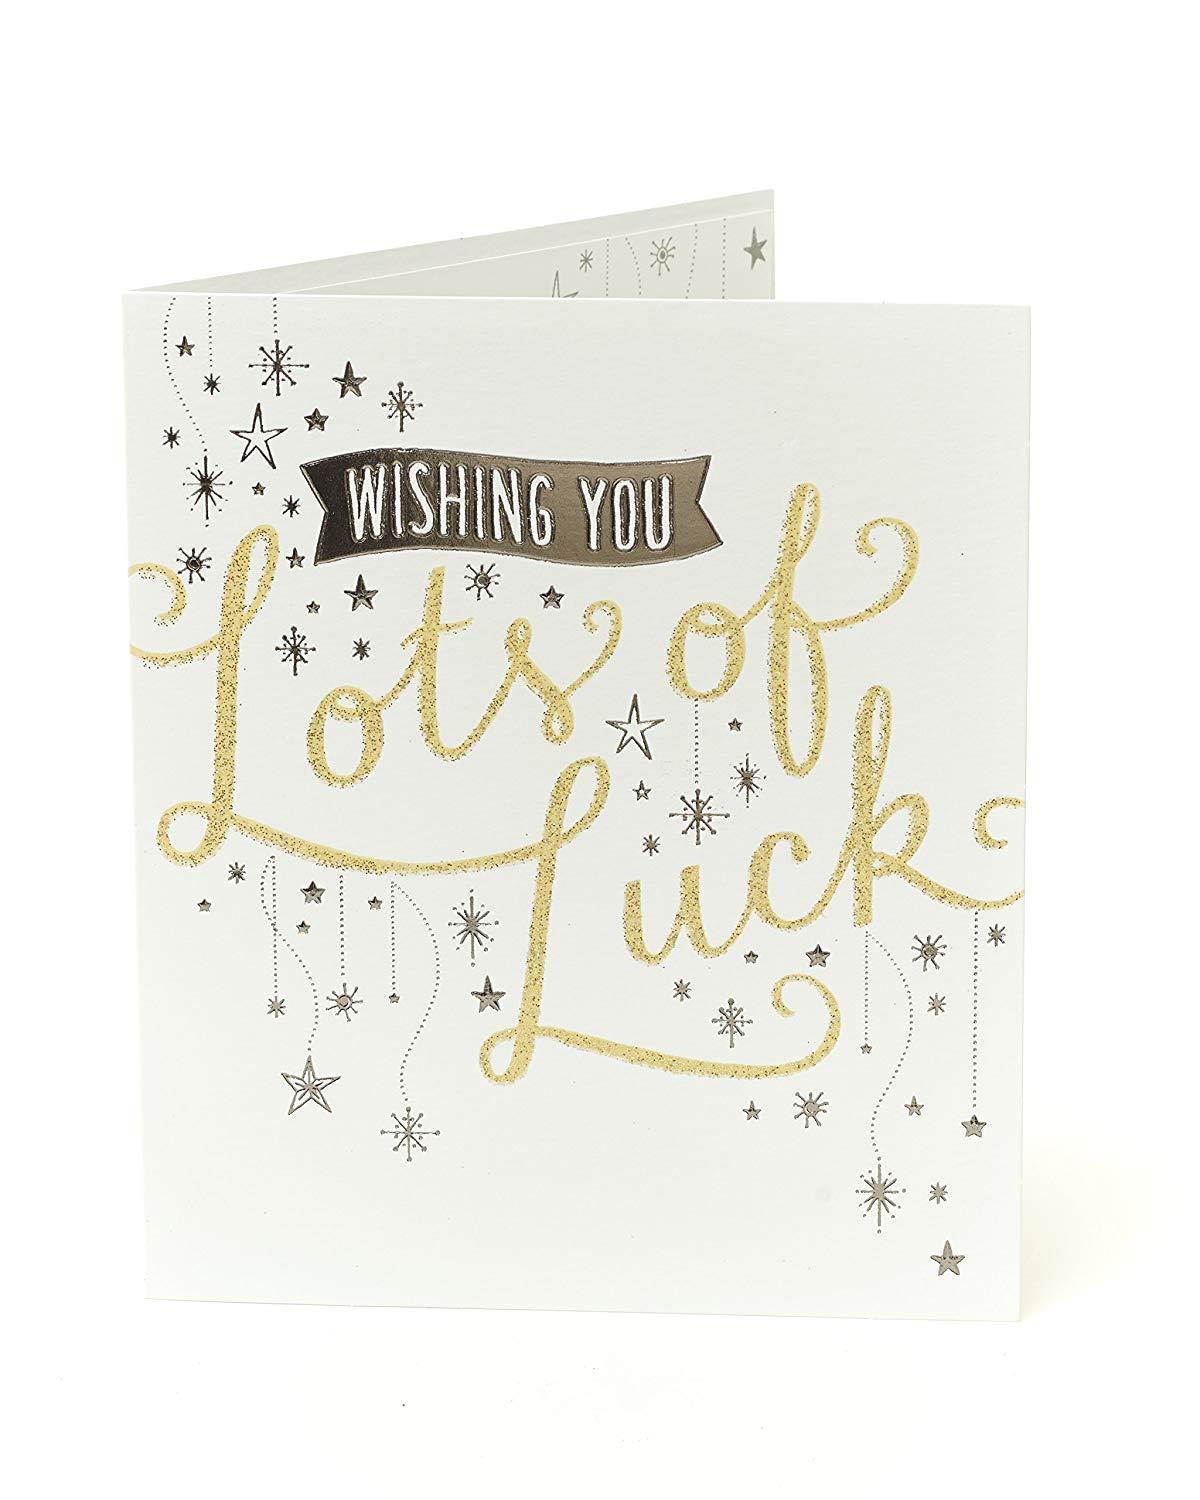 Good Luck Lettering Card Wishing You Lots of Luck!